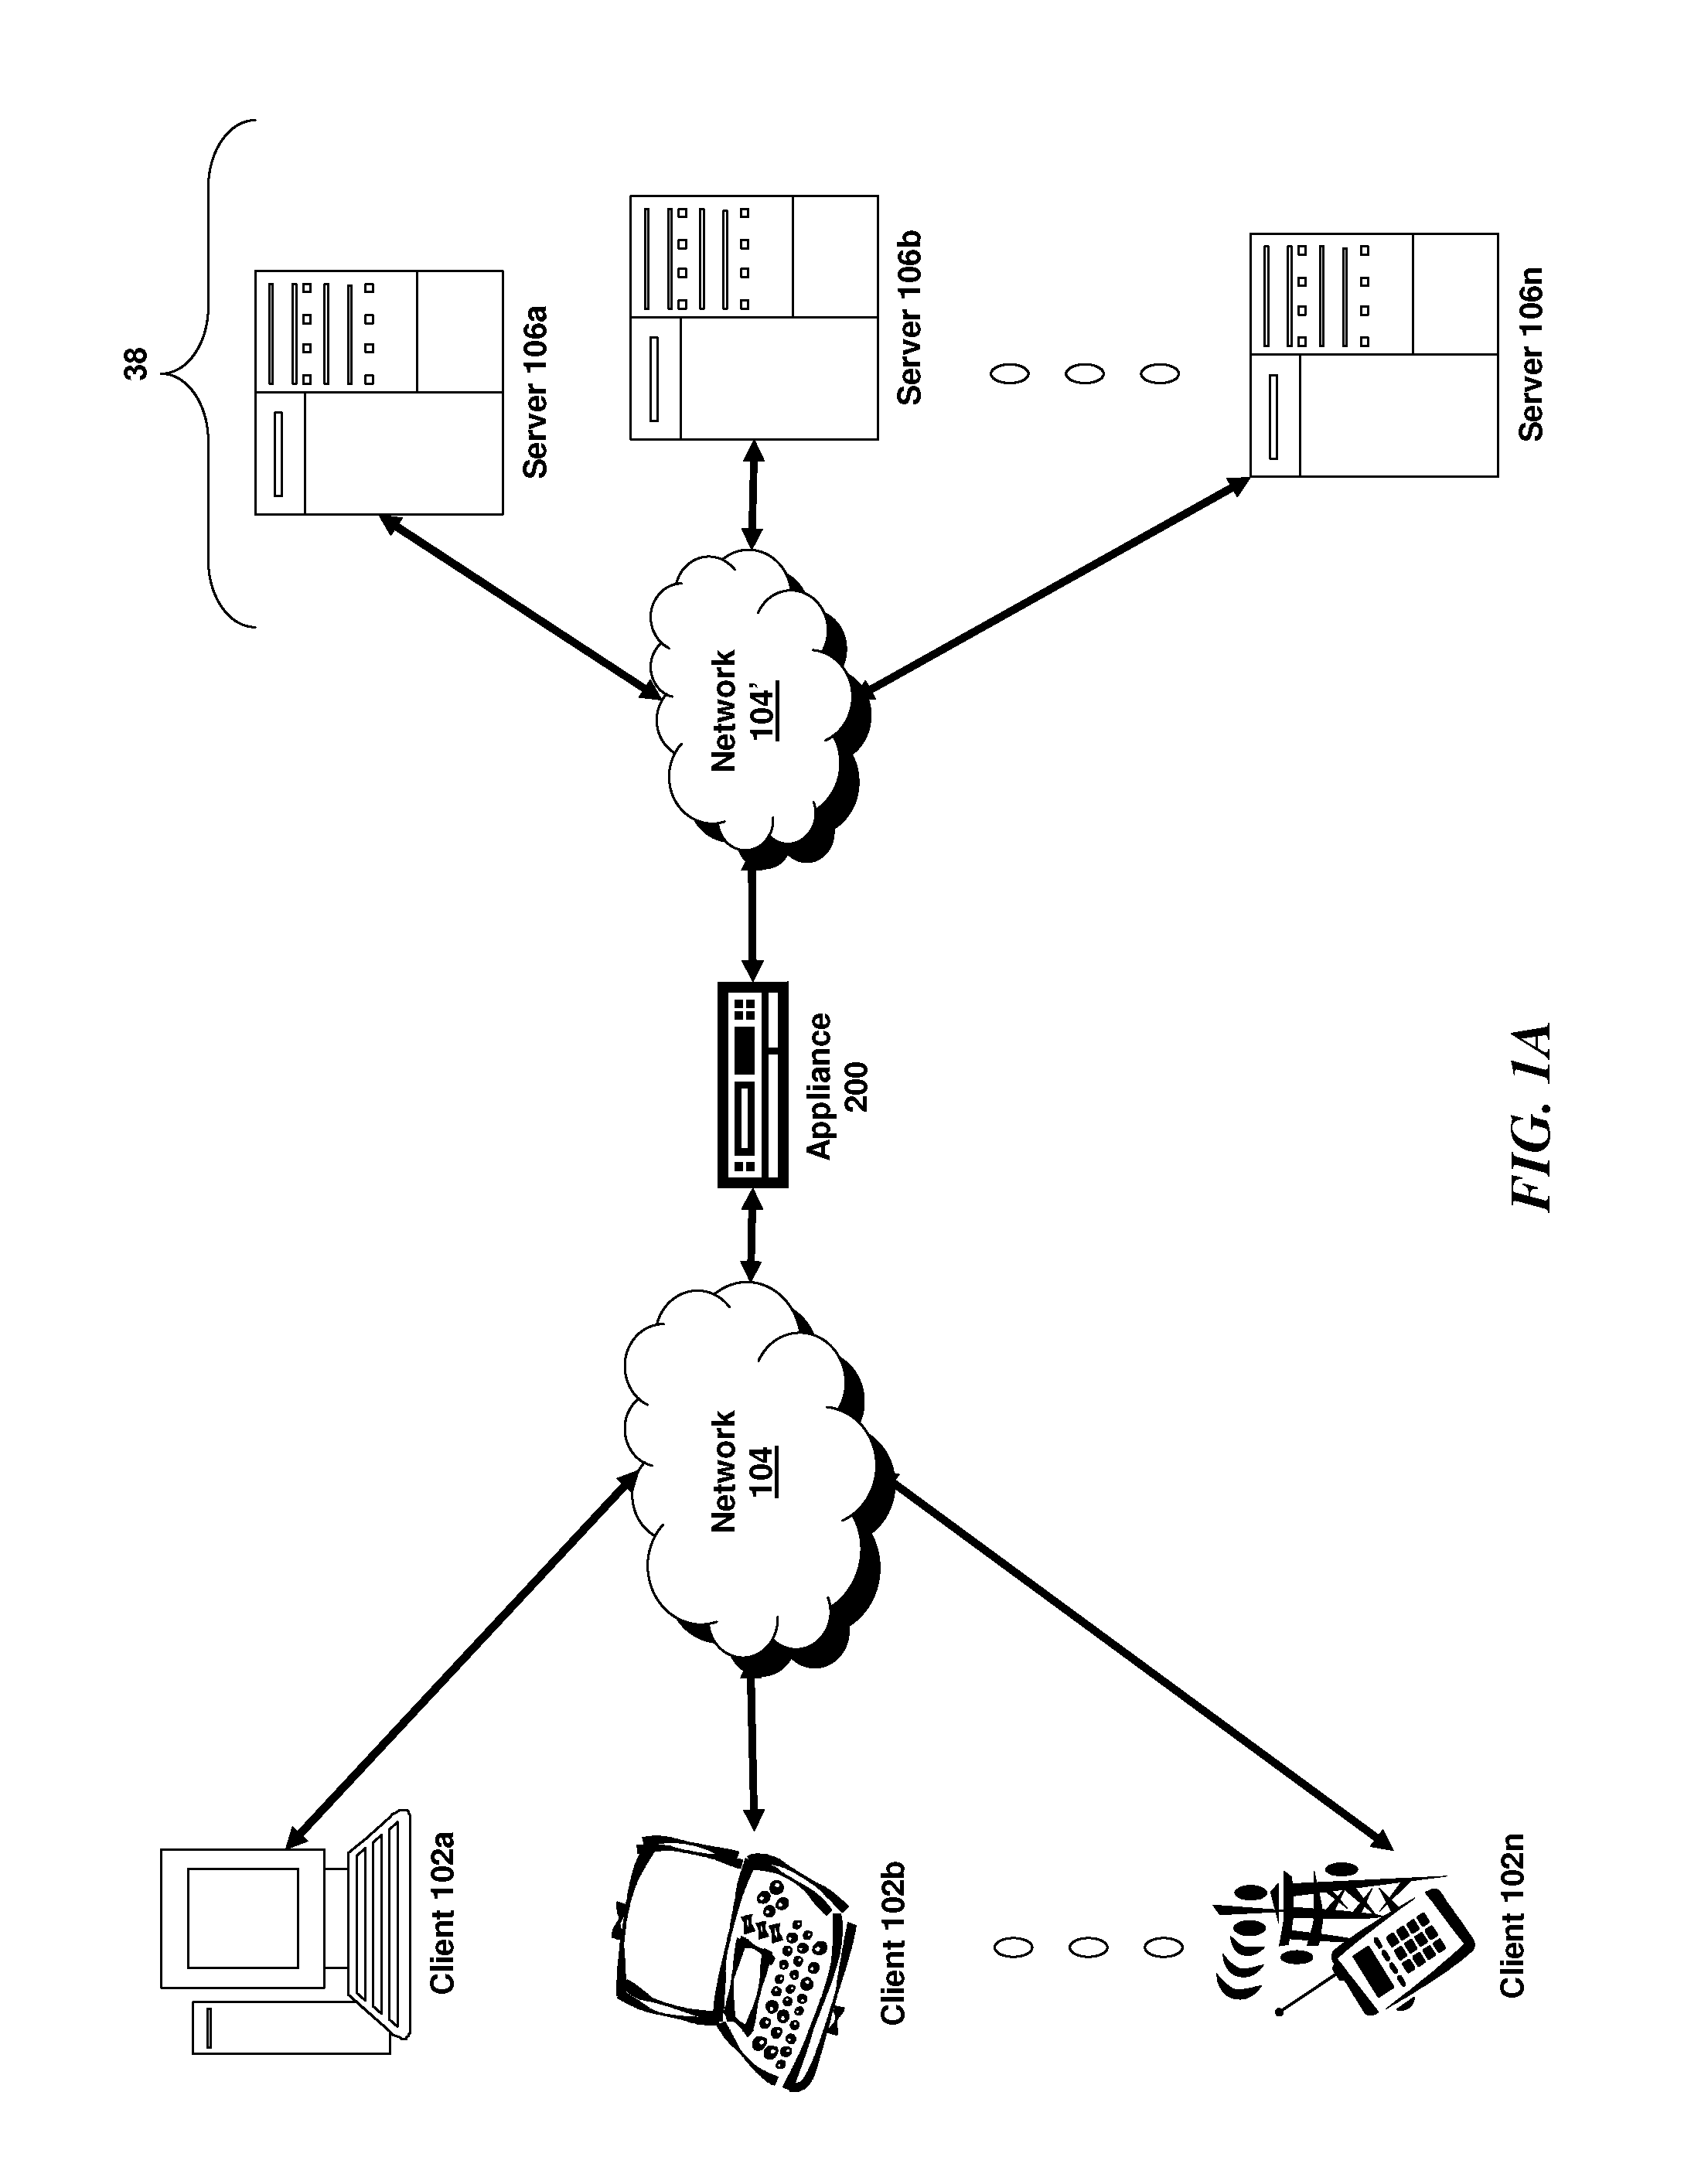 Systems and methods for handling limit parameters for a multi-core system